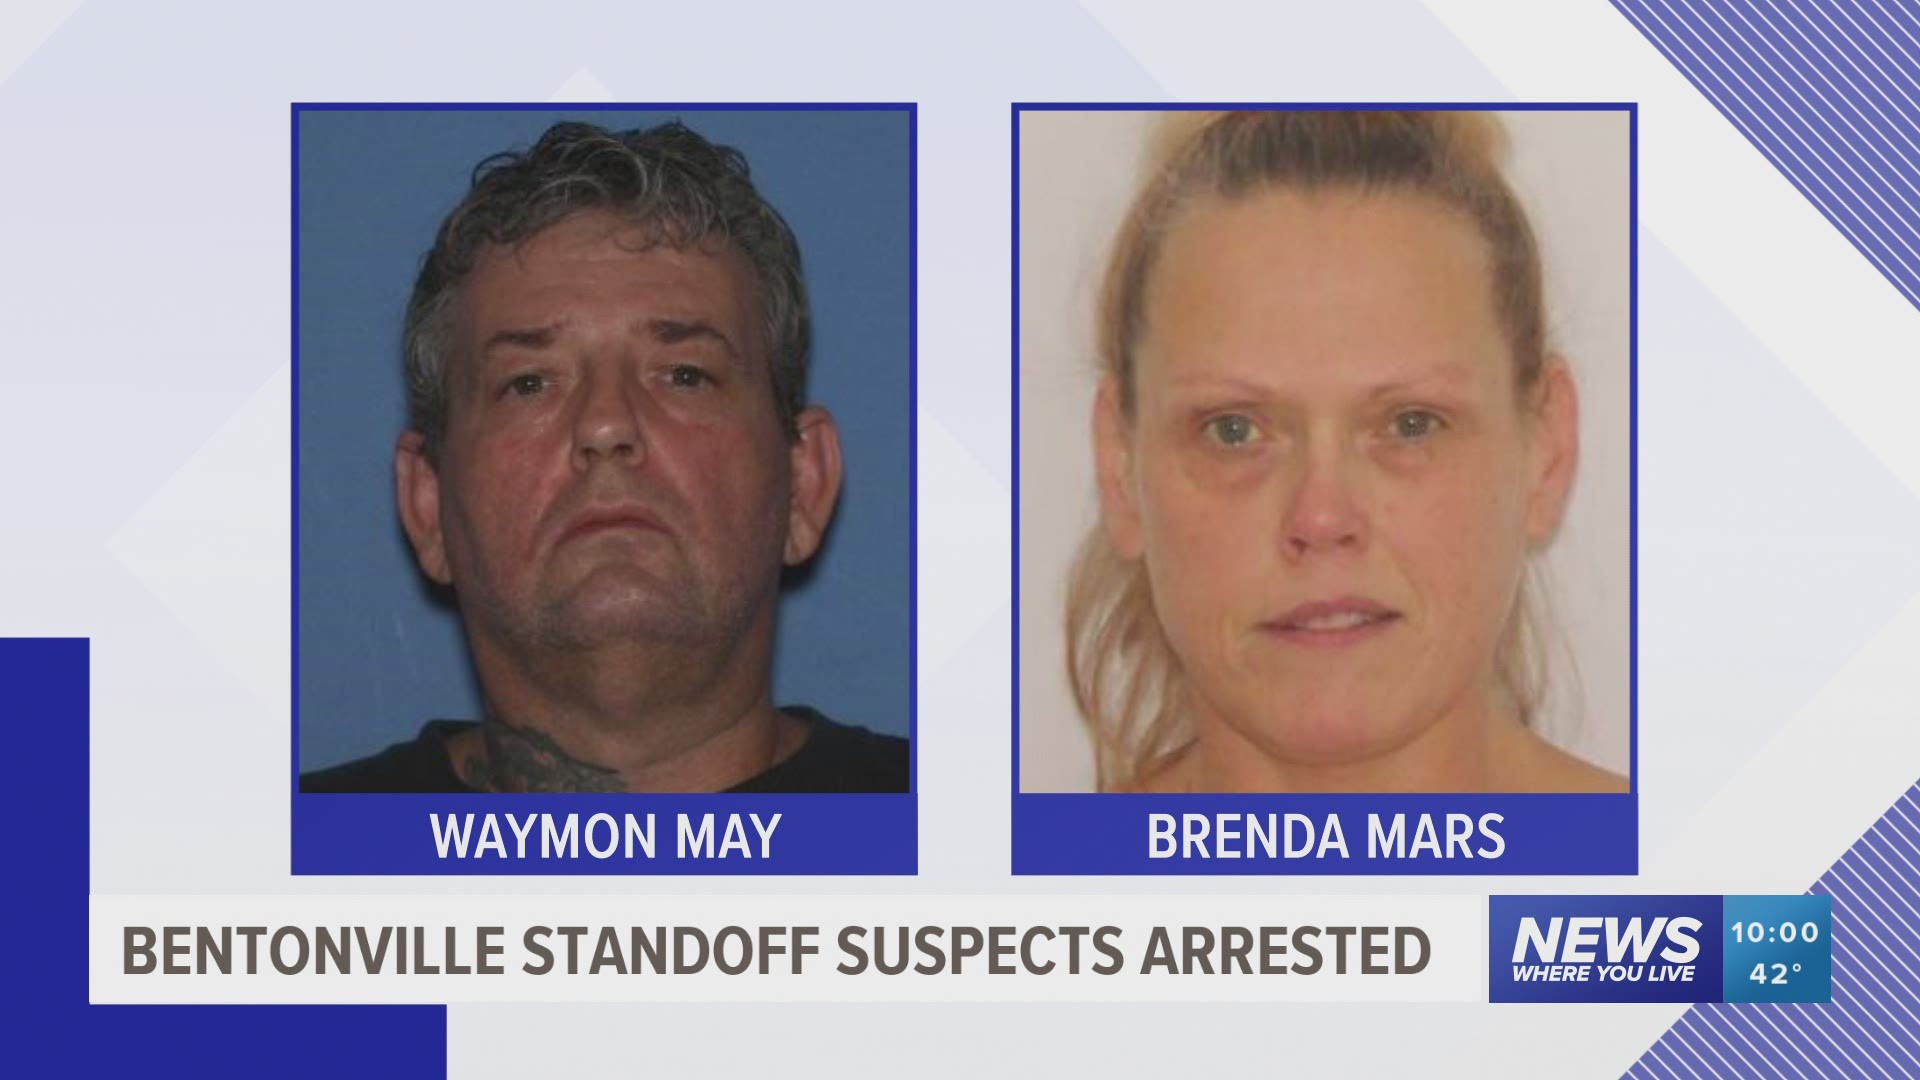 Two suspects are in custody at this time. They have been identified as Waymon May and Brenda Mars. https://bit.ly/3fh7on2